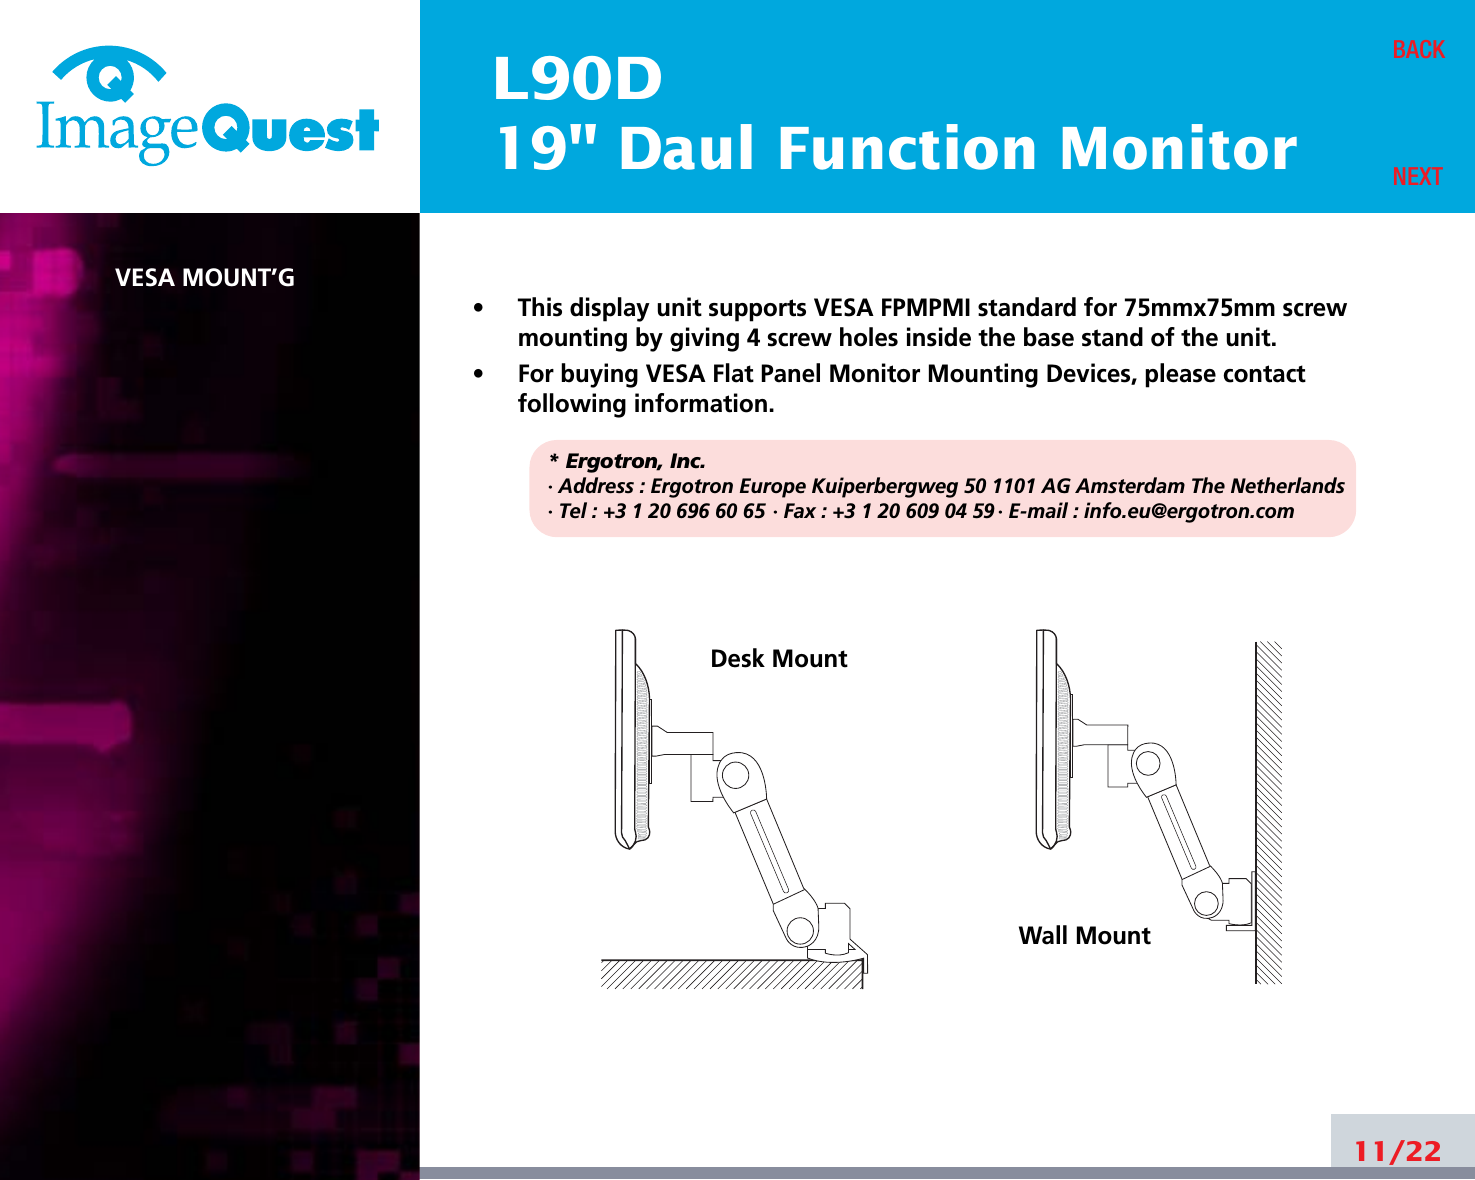 L90D19&quot; Daul Function MonitorVESA MOUNT’G•     This display unit supports VESA FPMPMI standard for 75mmx75mm screwmounting by giving 4 screw holes inside the base stand of the unit.•     For buying VESA Flat Panel Monitor Mounting Devices, please contactfollowing information.* Ergotron, Inc.· Address : Ergotron Europe Kuiperbergweg 50 1101 AG Amsterdam The Netherlands· Tel : +3 1 20 696 60 65 · Fax : +3 1 20 609 04 59 · E-mail : info.eu@ergotron.com11/22BACKNEXTDesk MountWall Mount